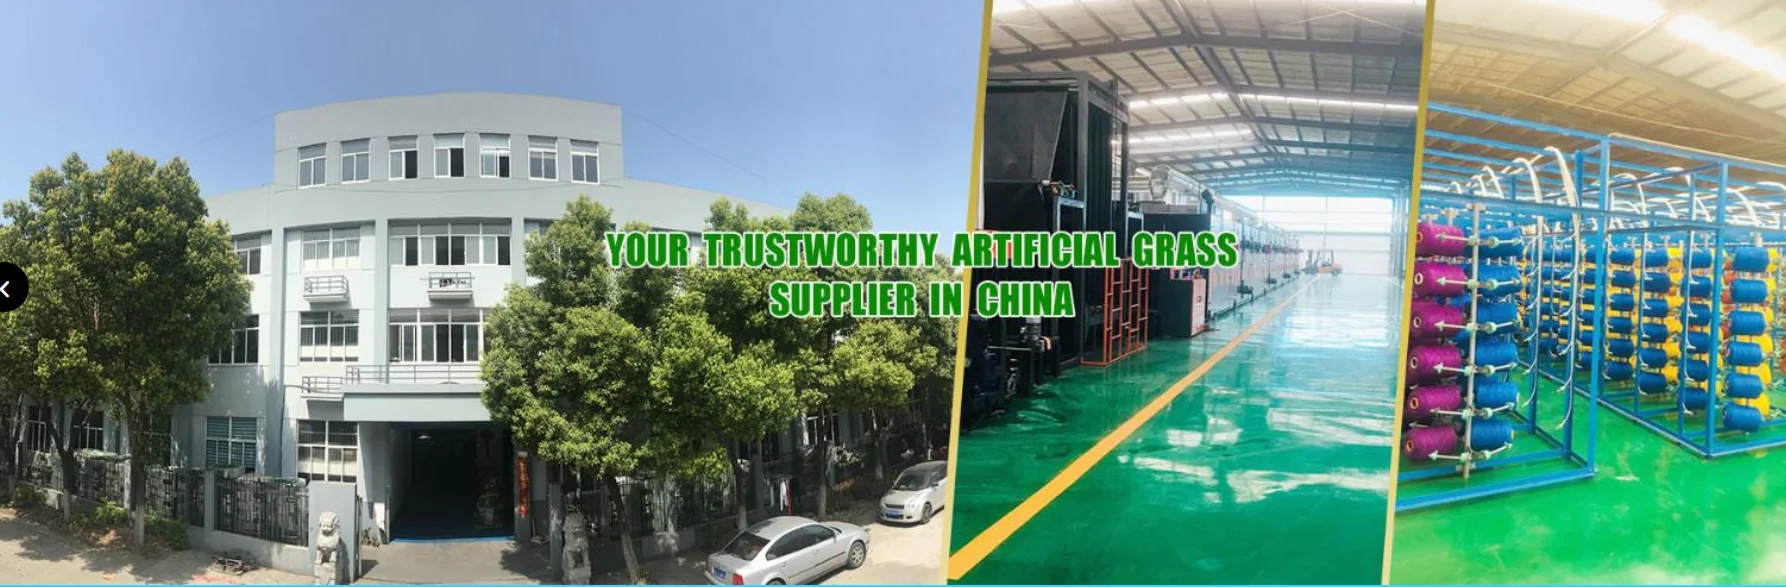 100% new synthetic soft turf football artificial grass